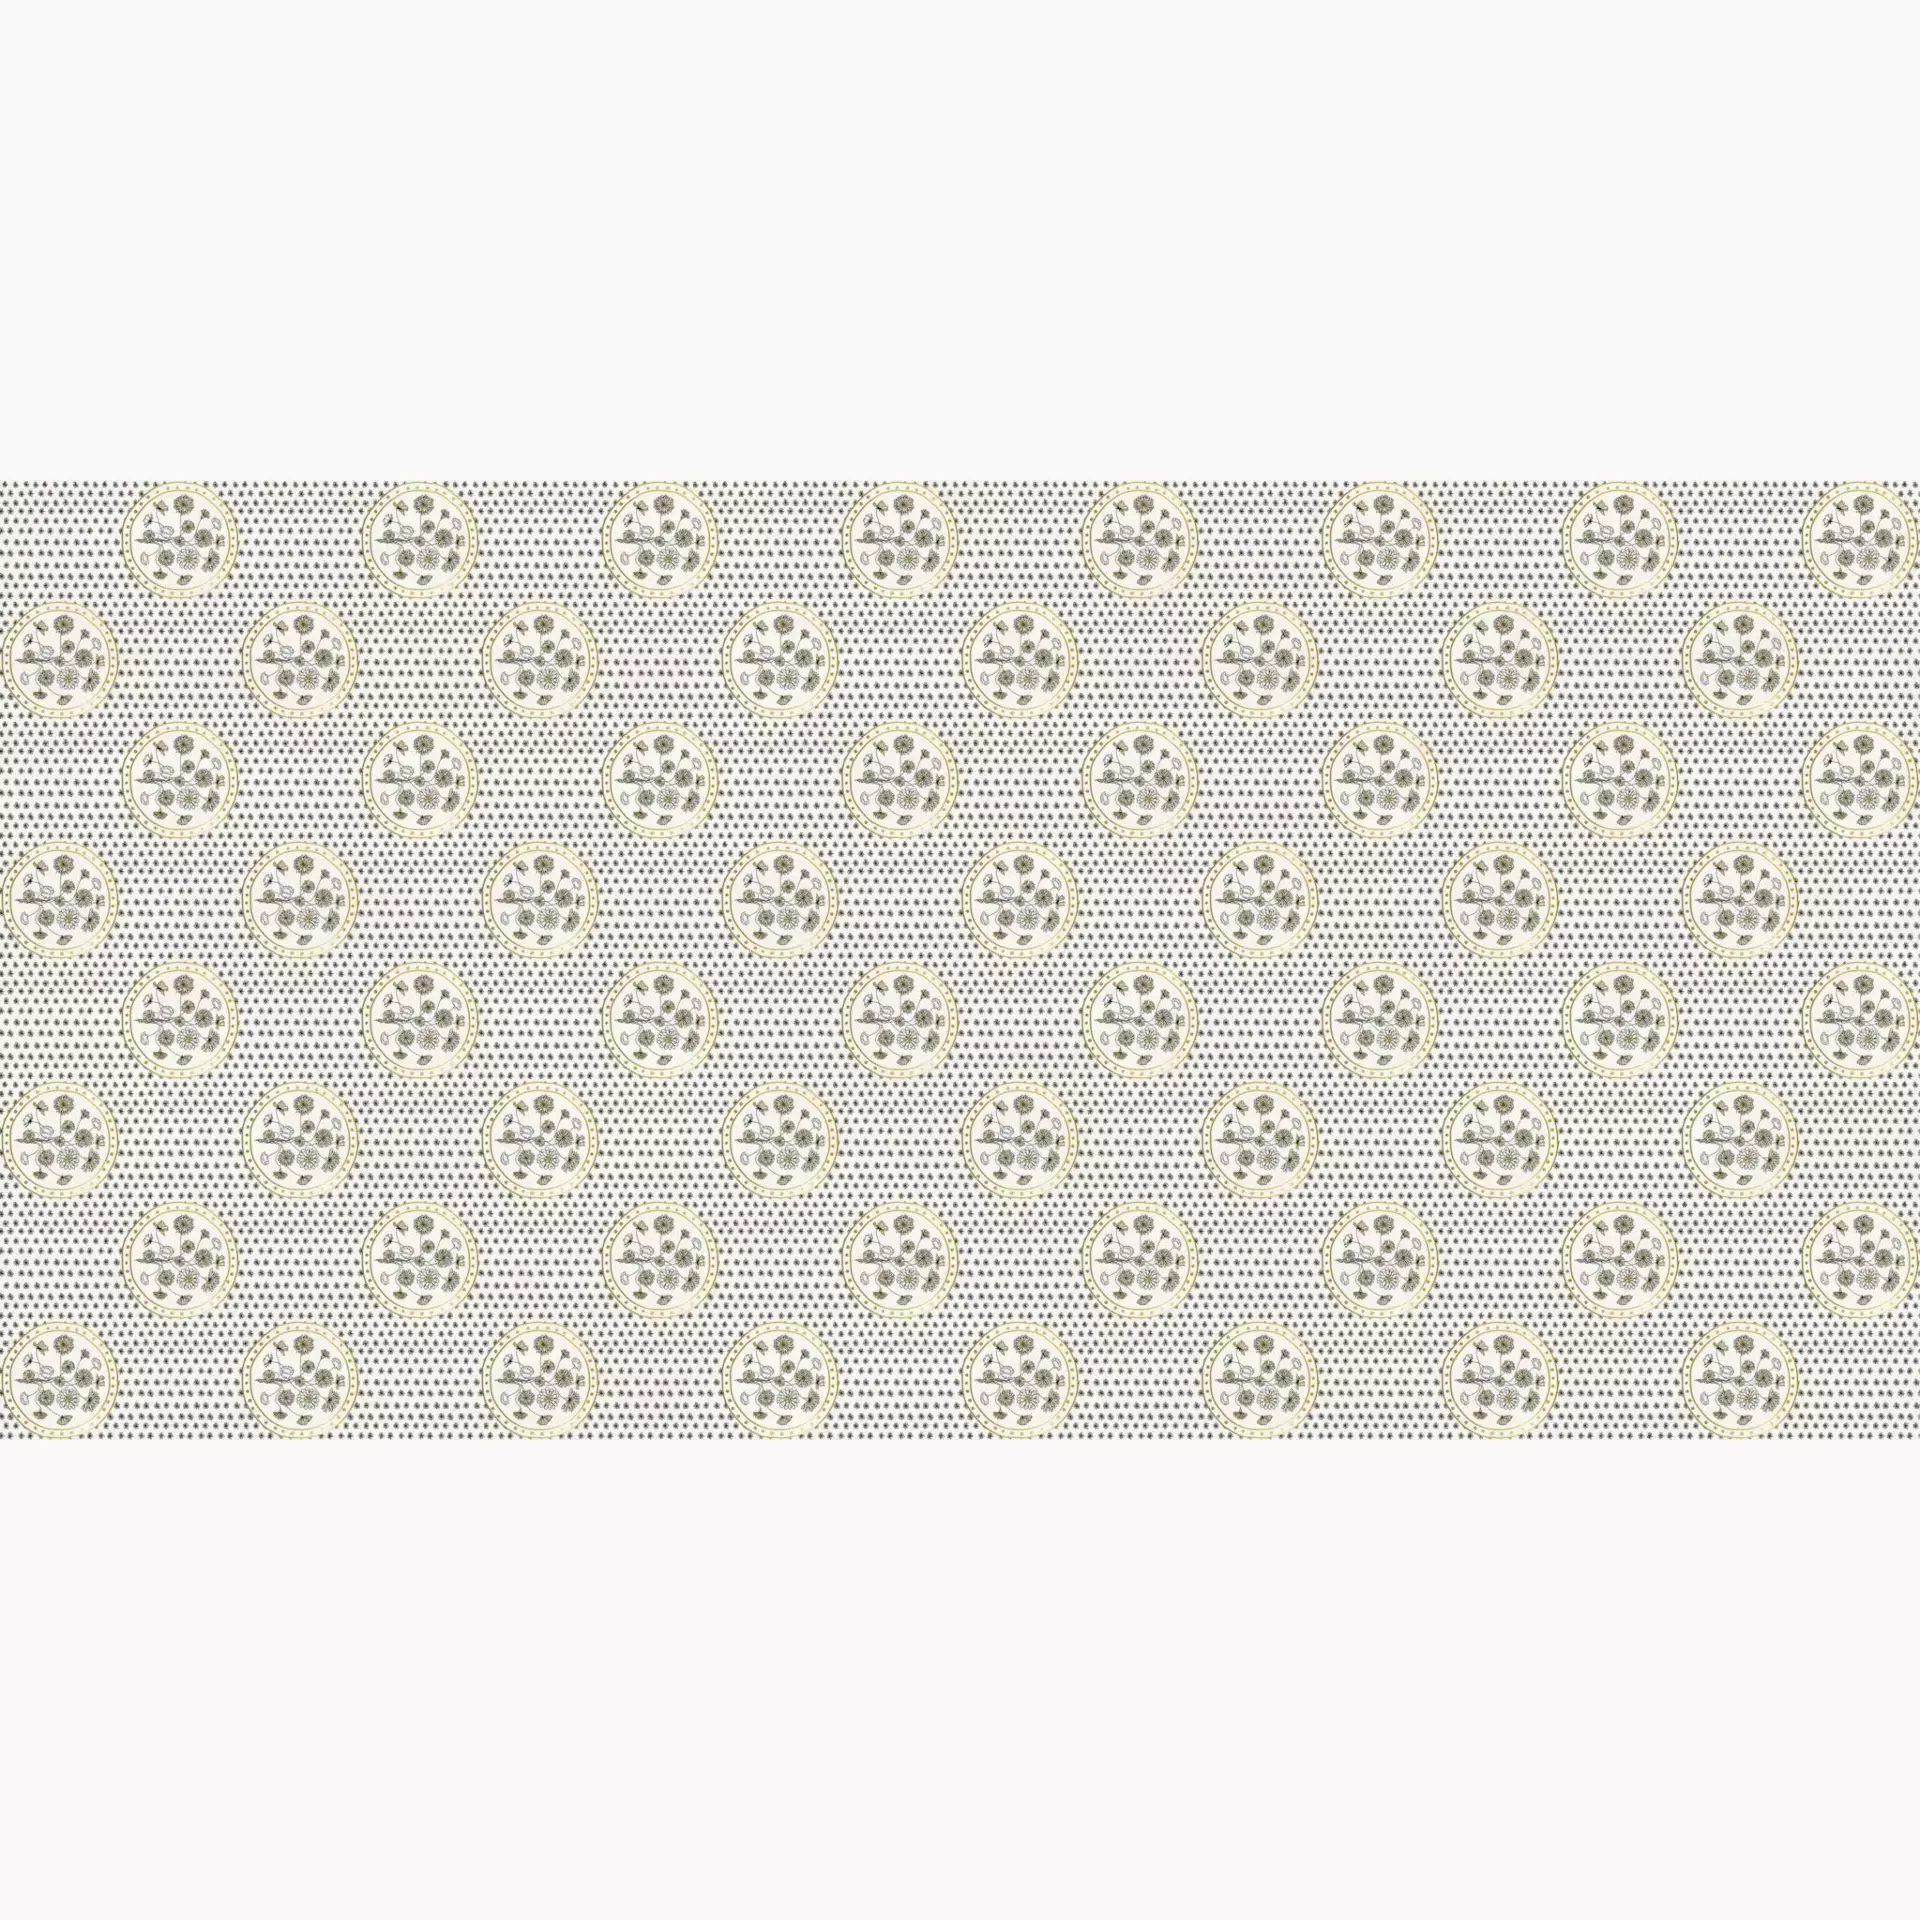 ABK Wide & Style Oro Digit + Decor PF60007376 160x320cm rectified 6mm